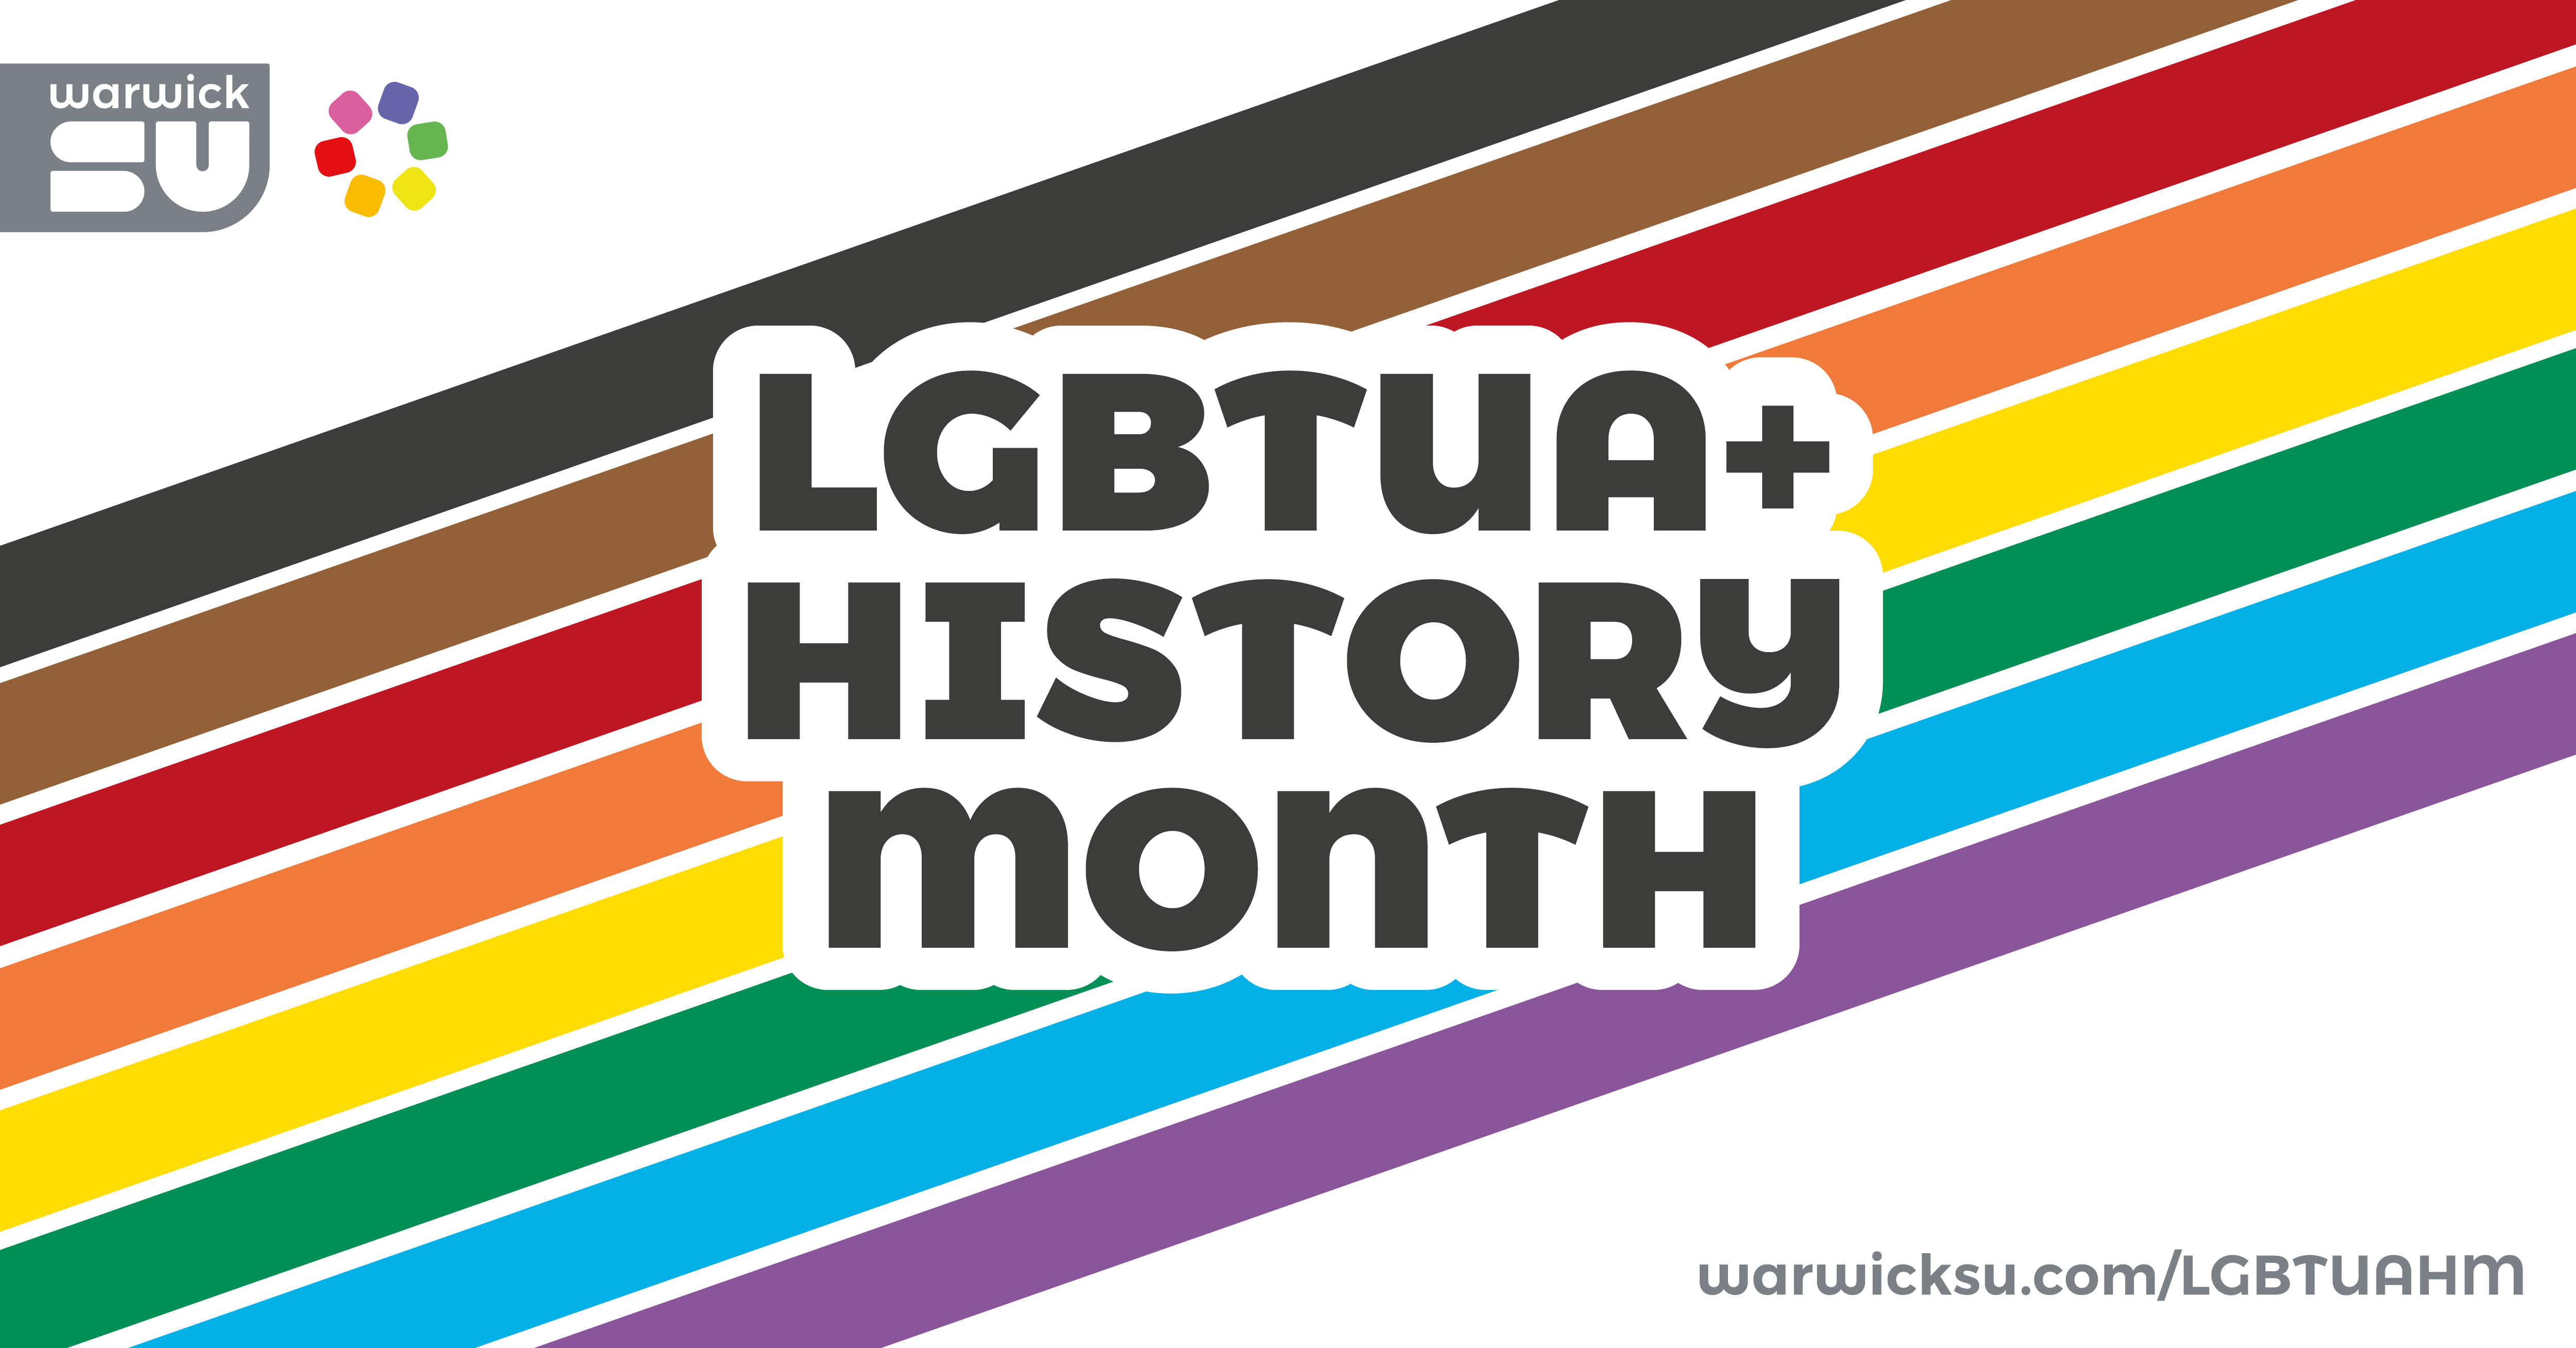 LGBTUA+ history month banner